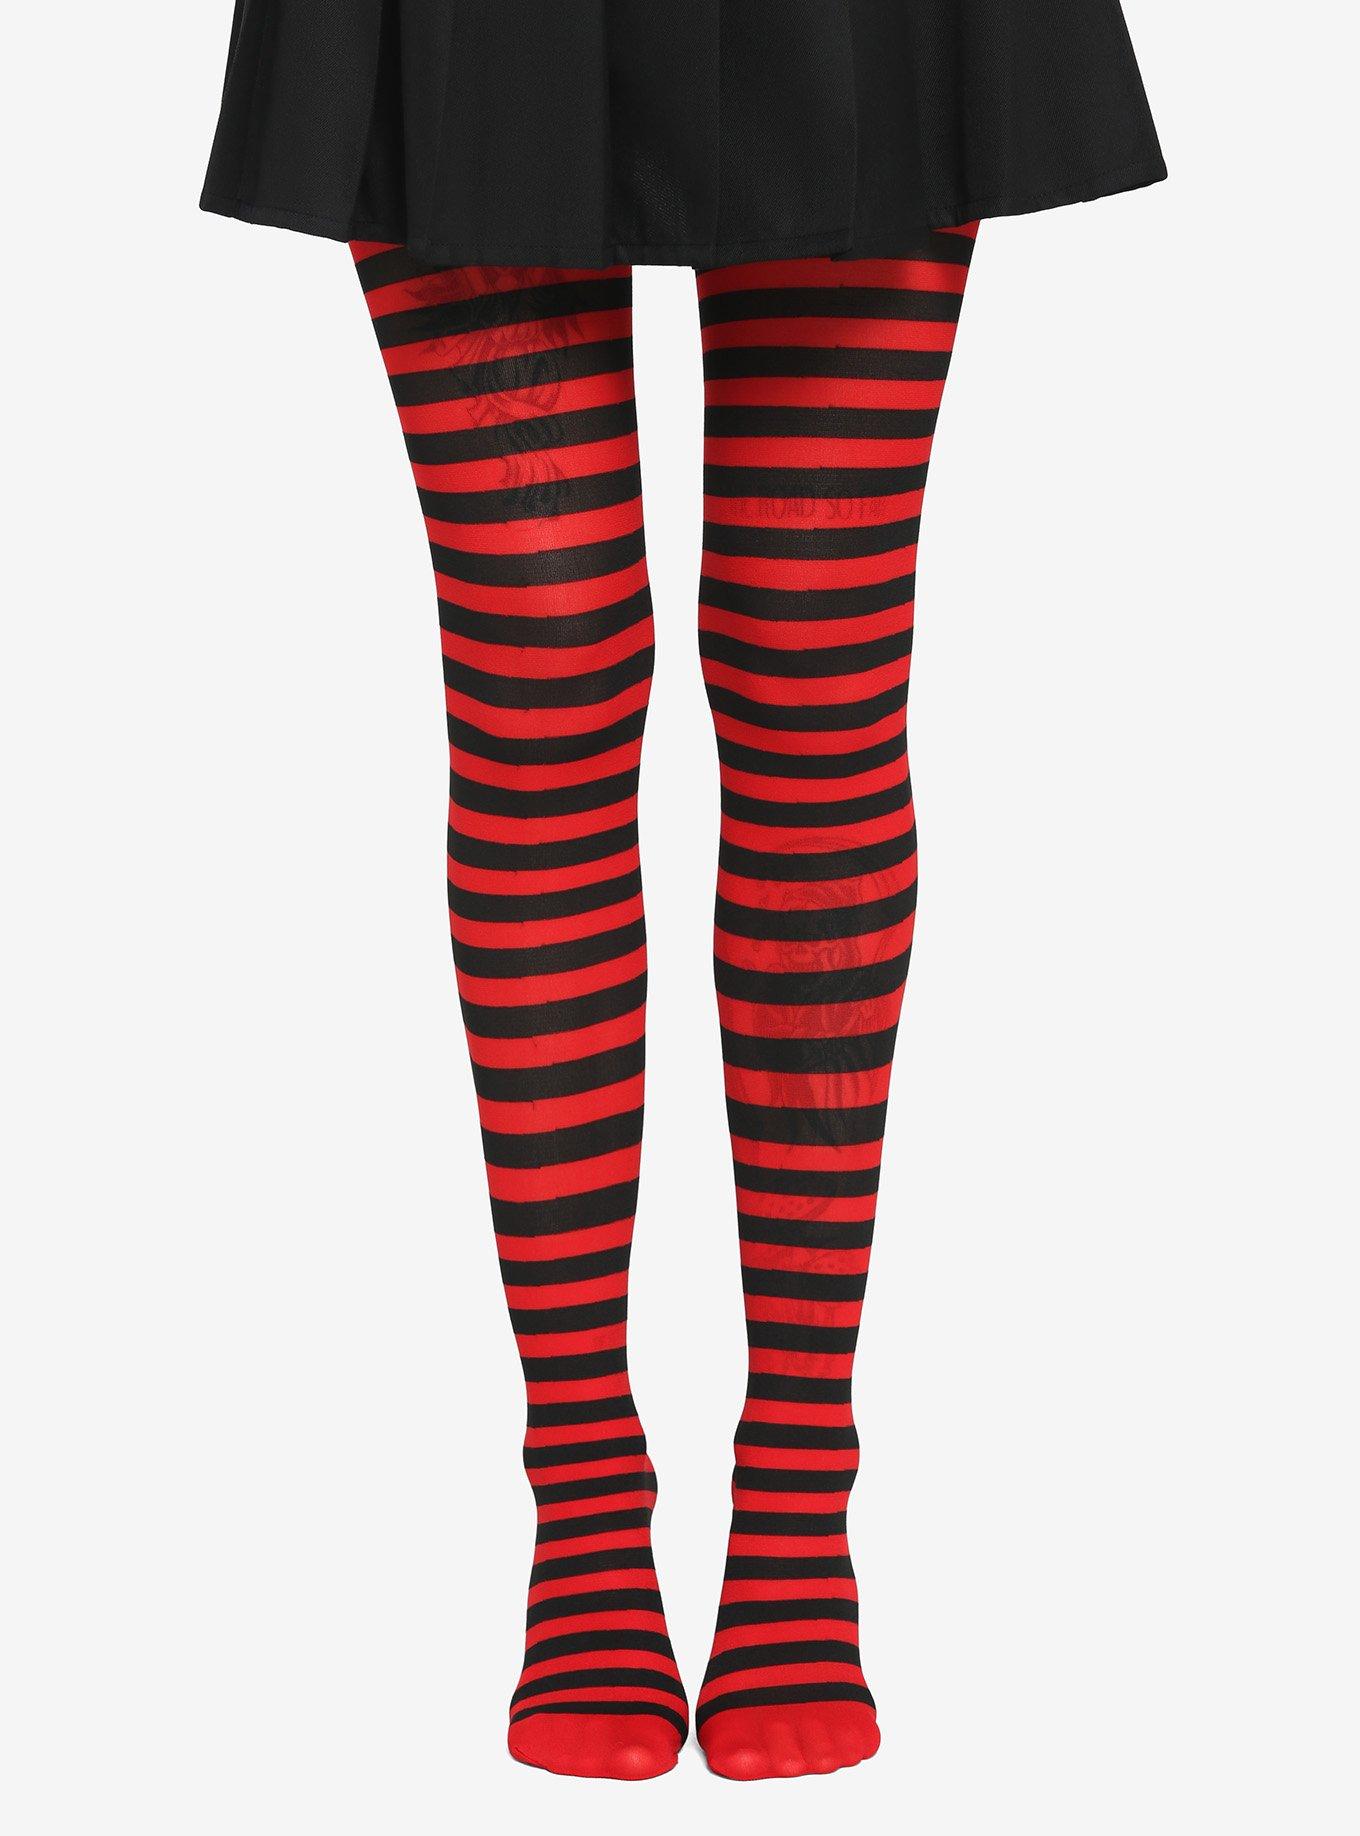  Hot Topic Black Shadow Stripe Tights BLACK OS: Clothing, Shoes  & Jewelry